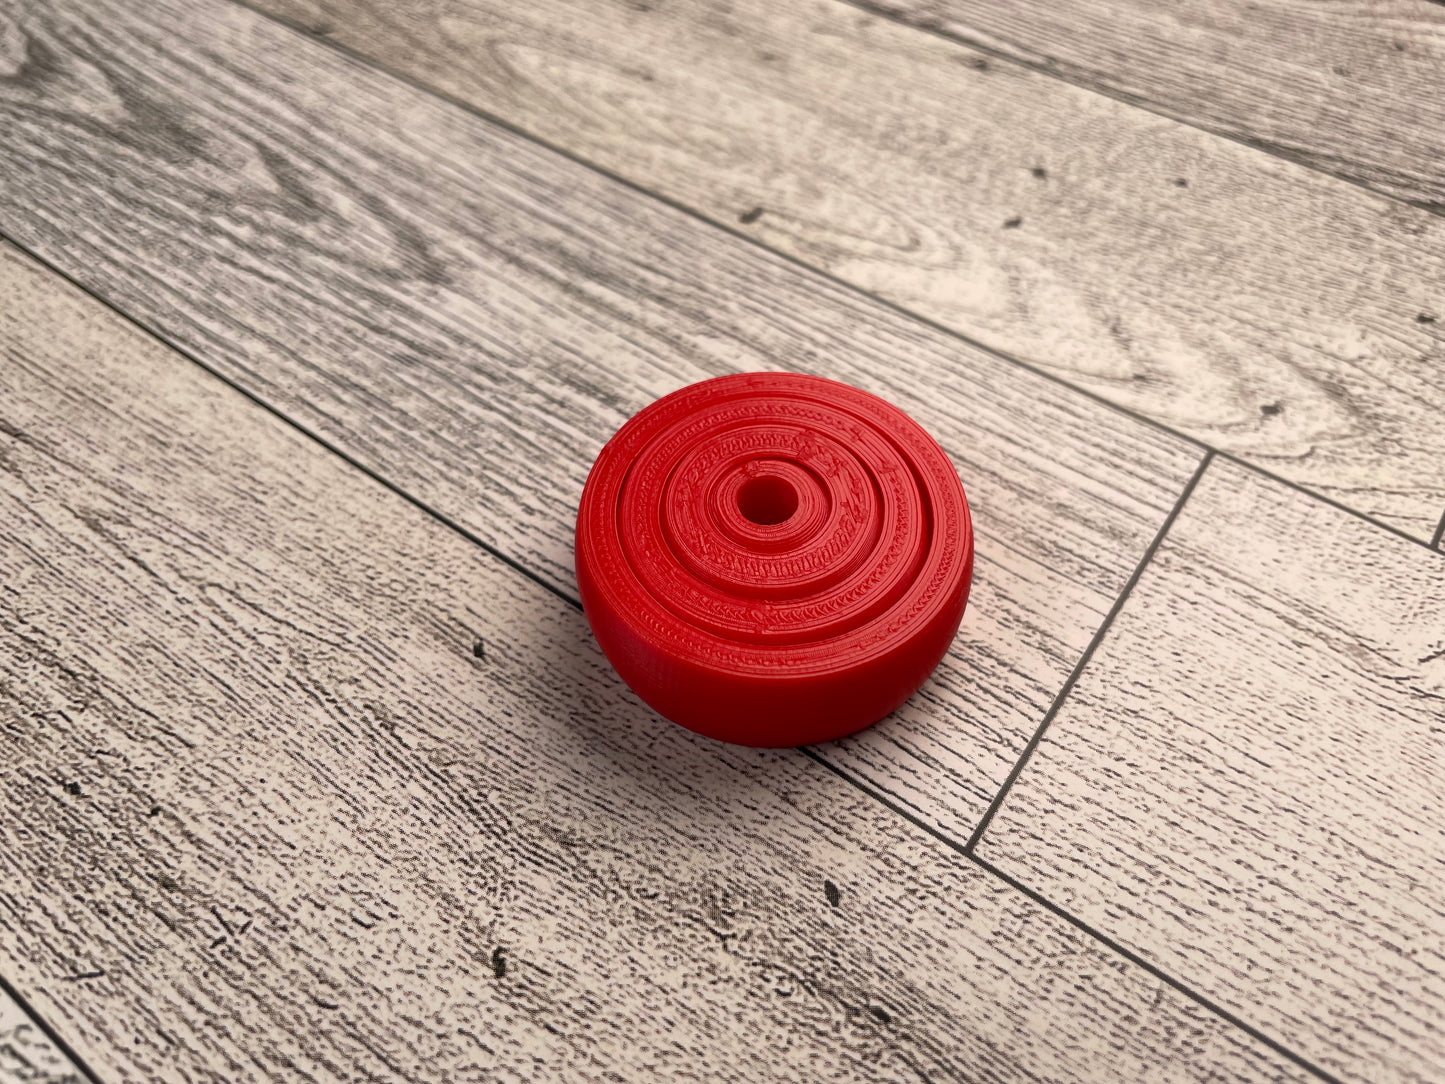 A small 3D printed gyro fidget that is about 1.5 inches in diameter on a wood background. It has four nested circles that can be spun and twirled. It is printed in red filament.